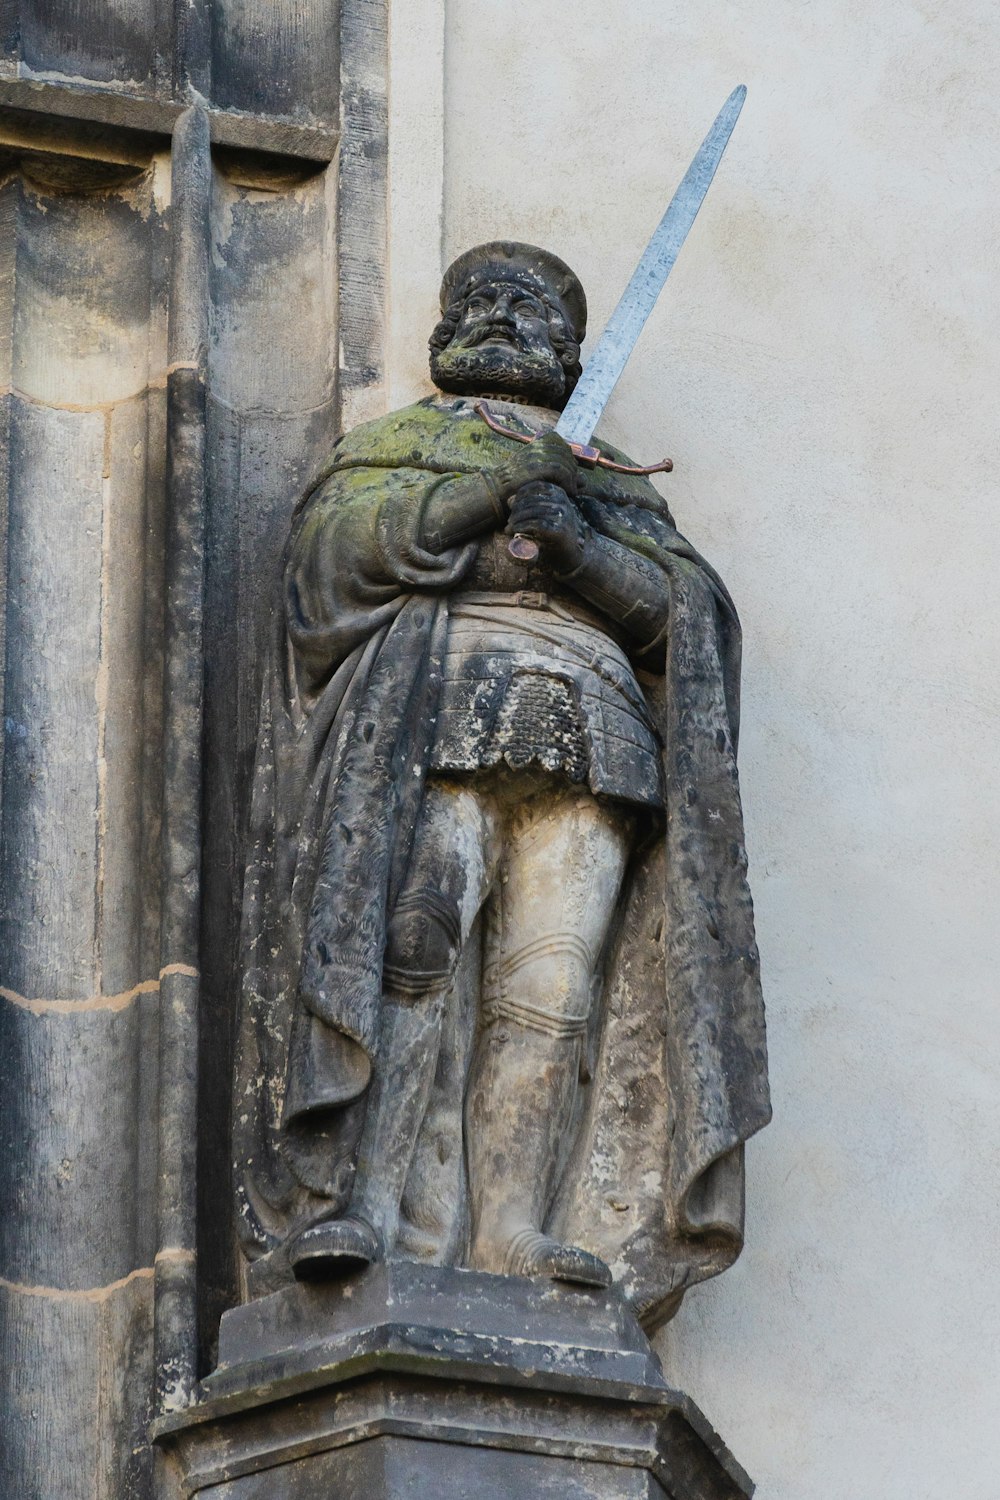 a statue of a person with a sword